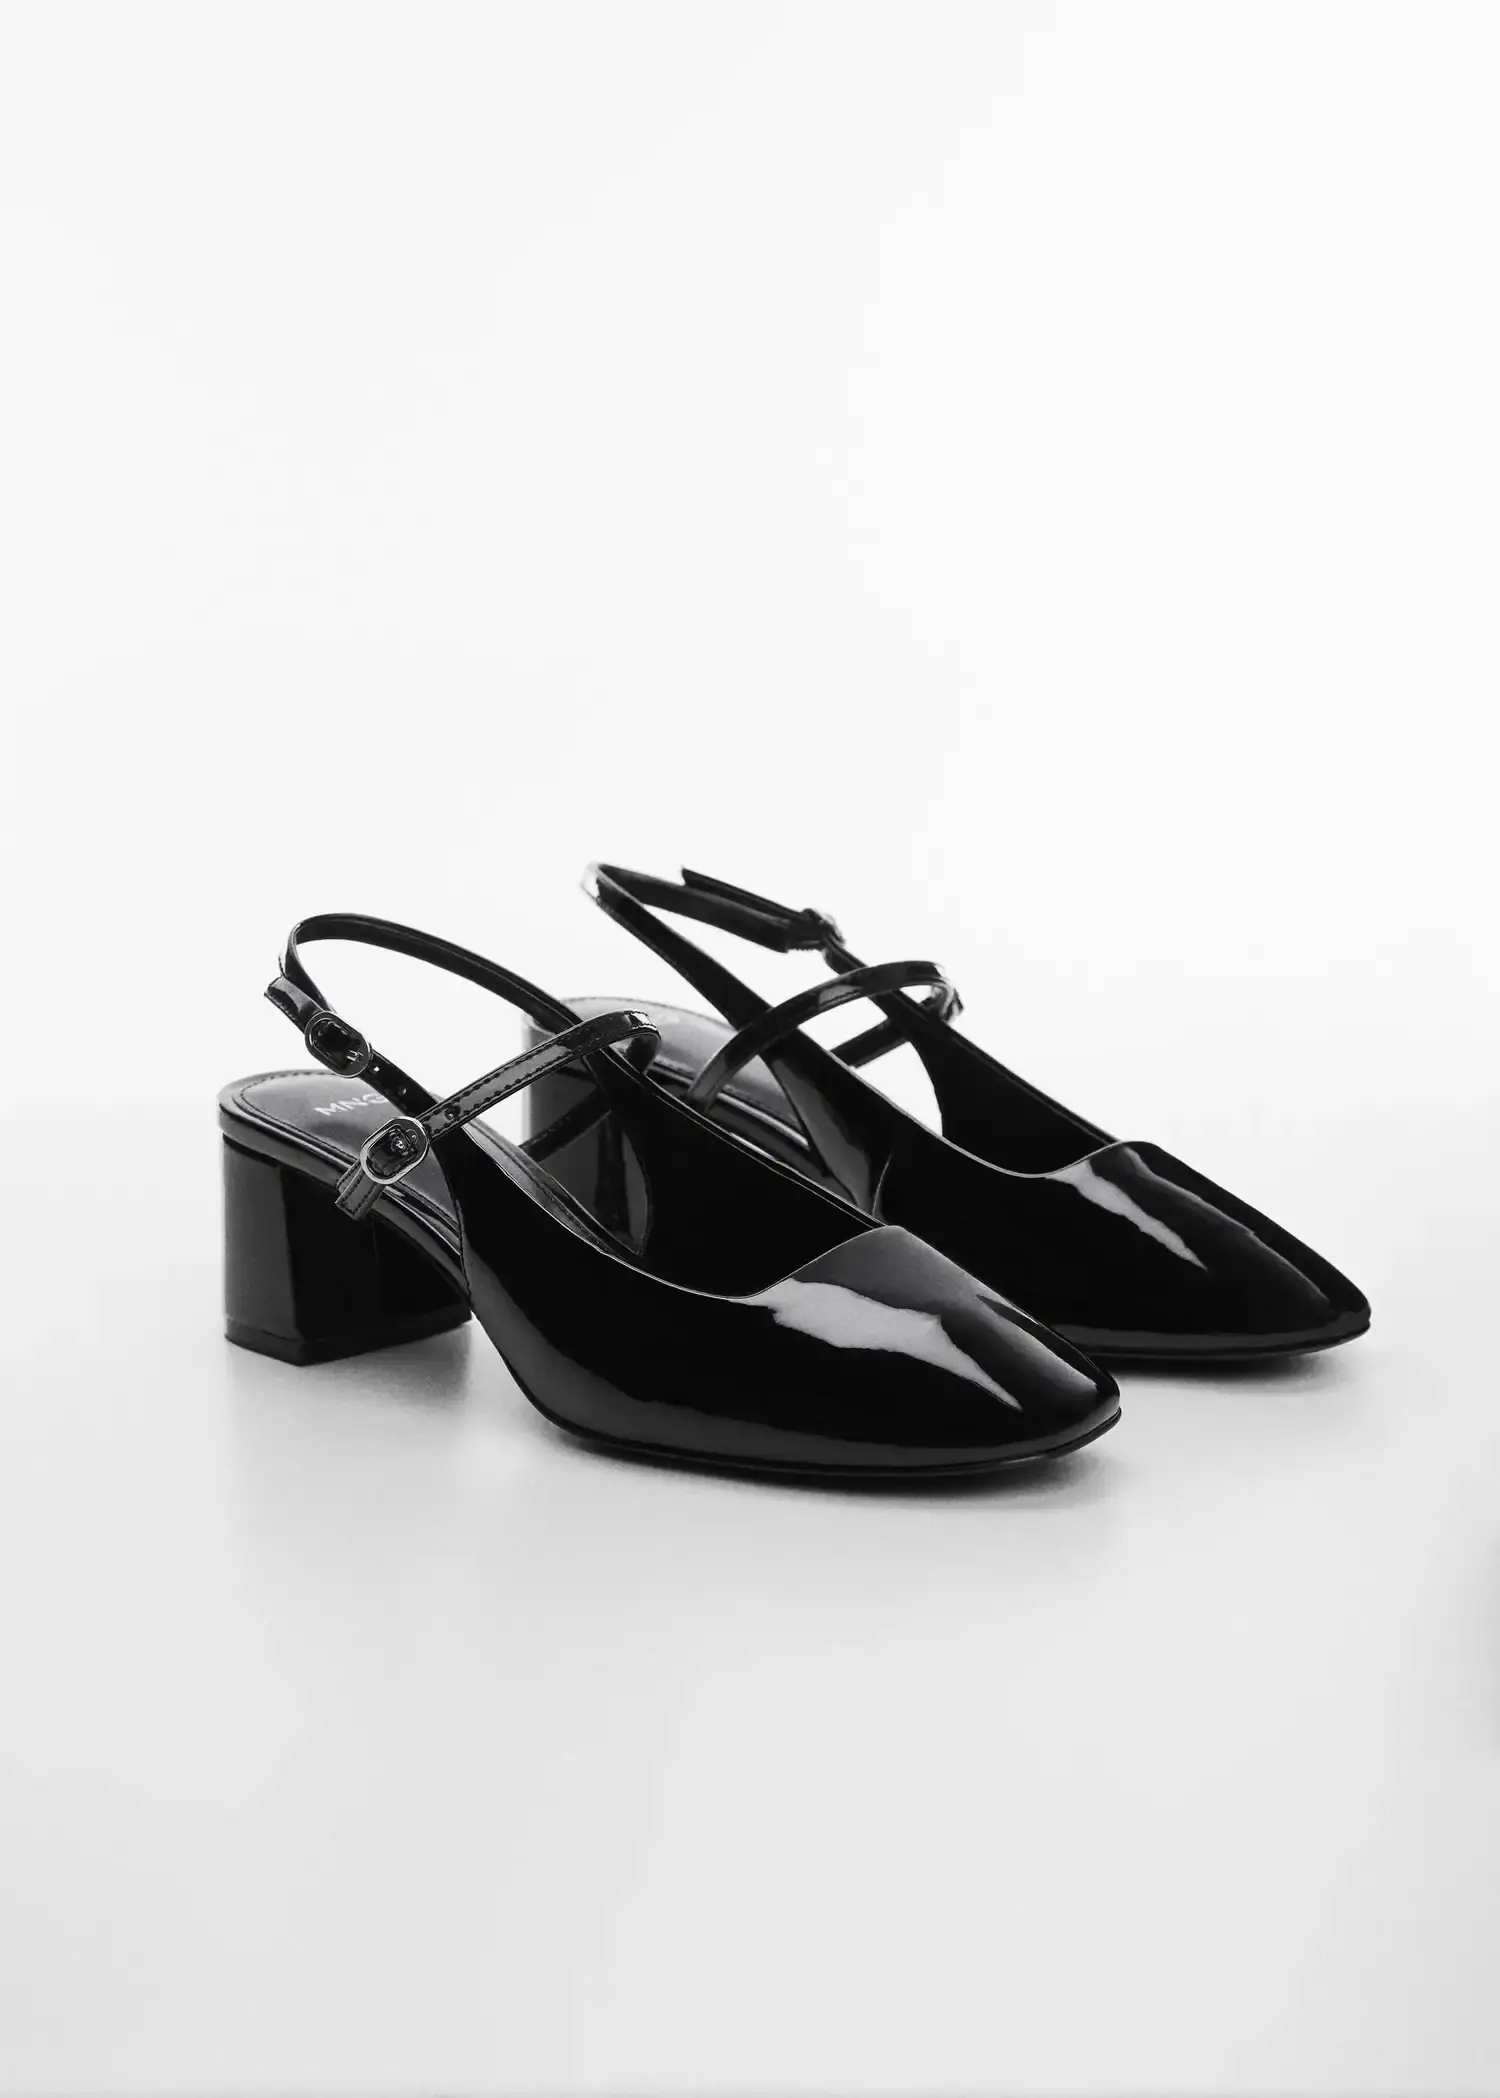 Mango Block heel shoe. a pair of black shoes sitting on top of a table. 